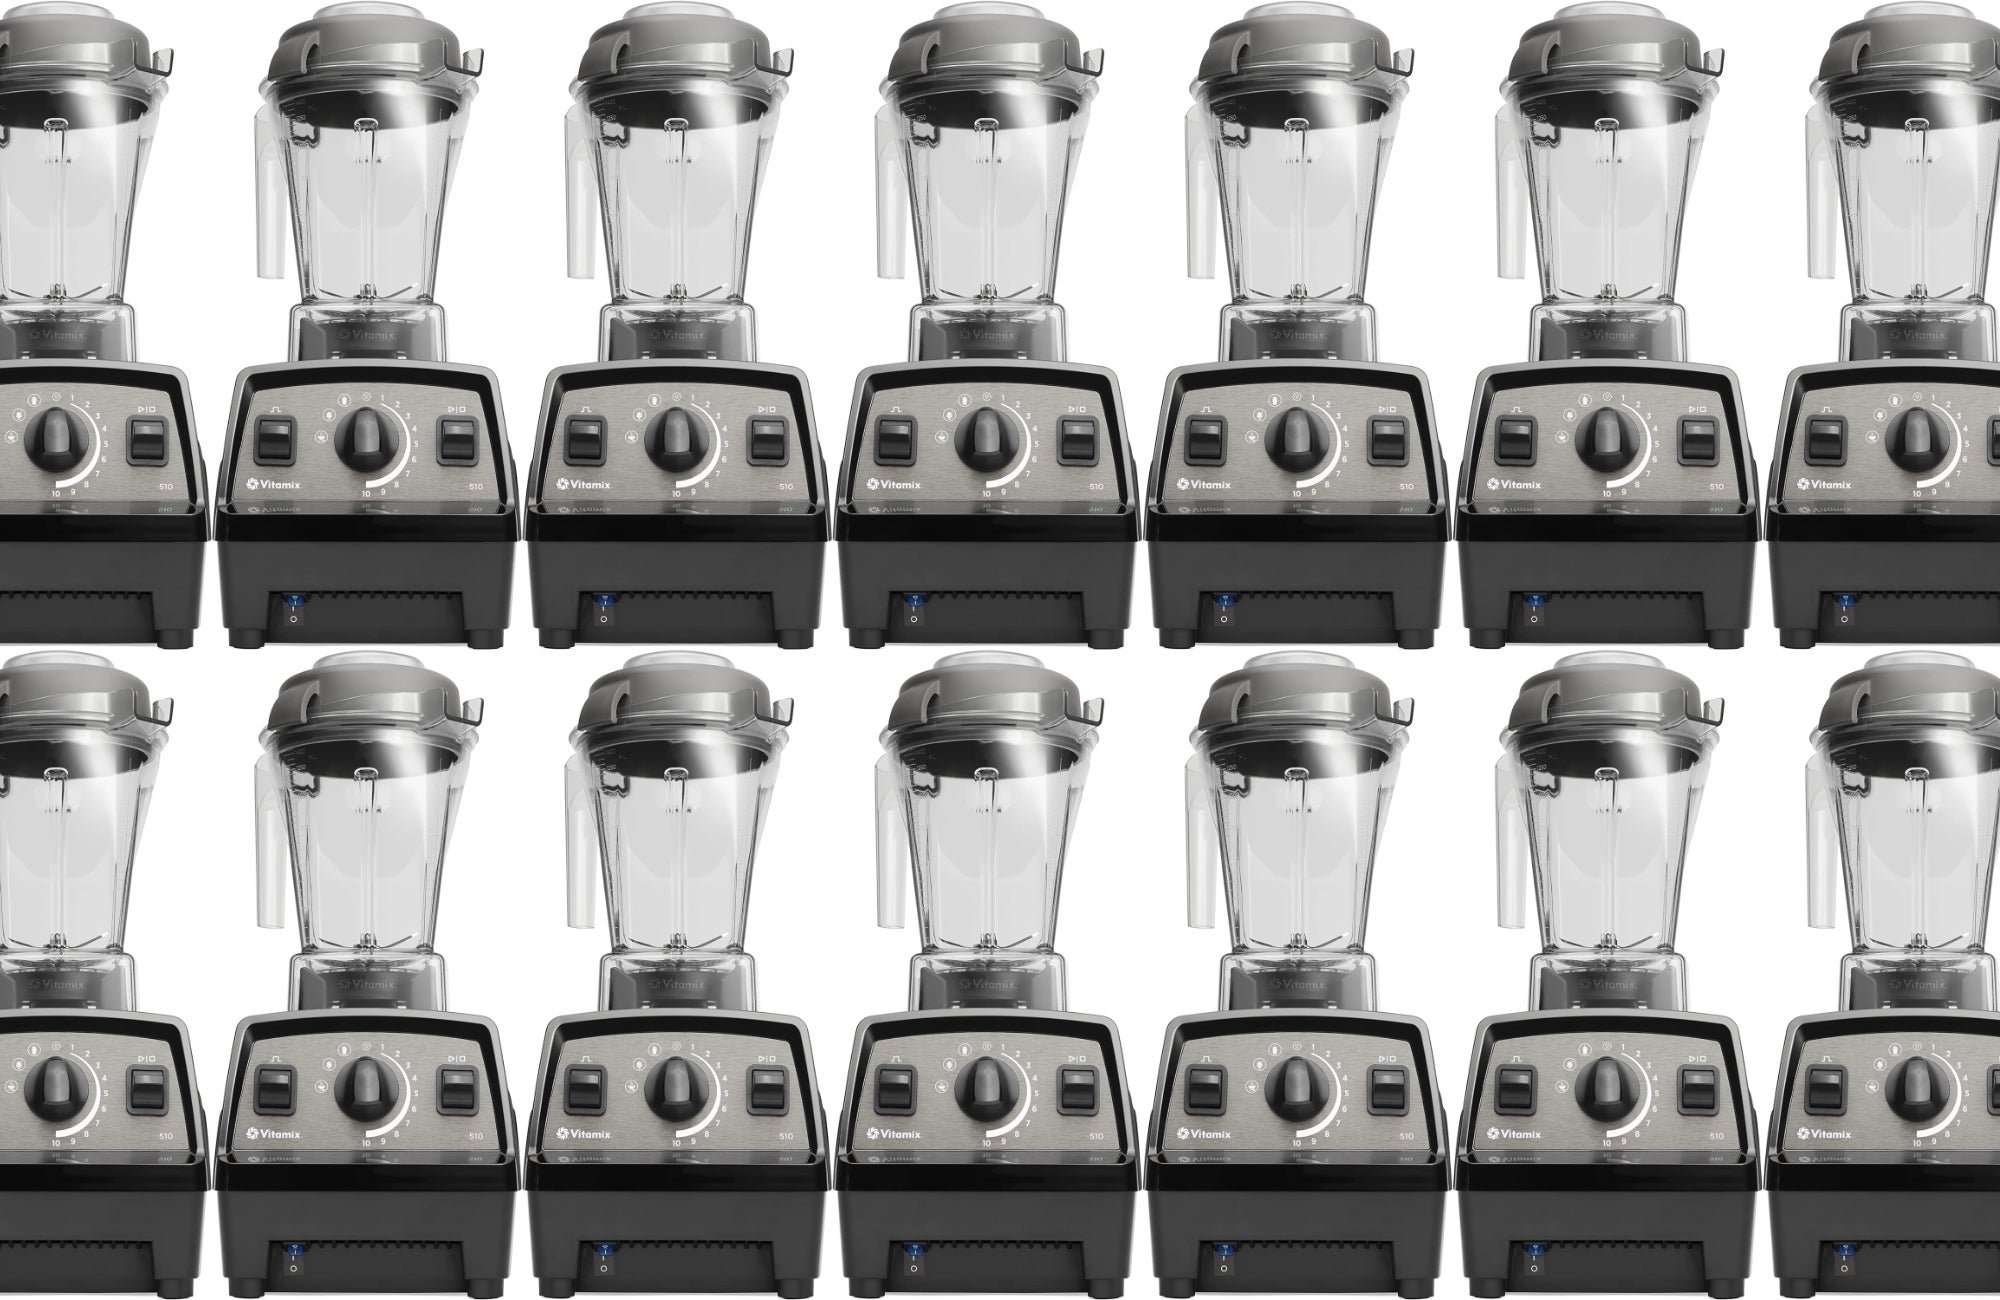 Save big with Cyber Monday deals on premium home appliances we love